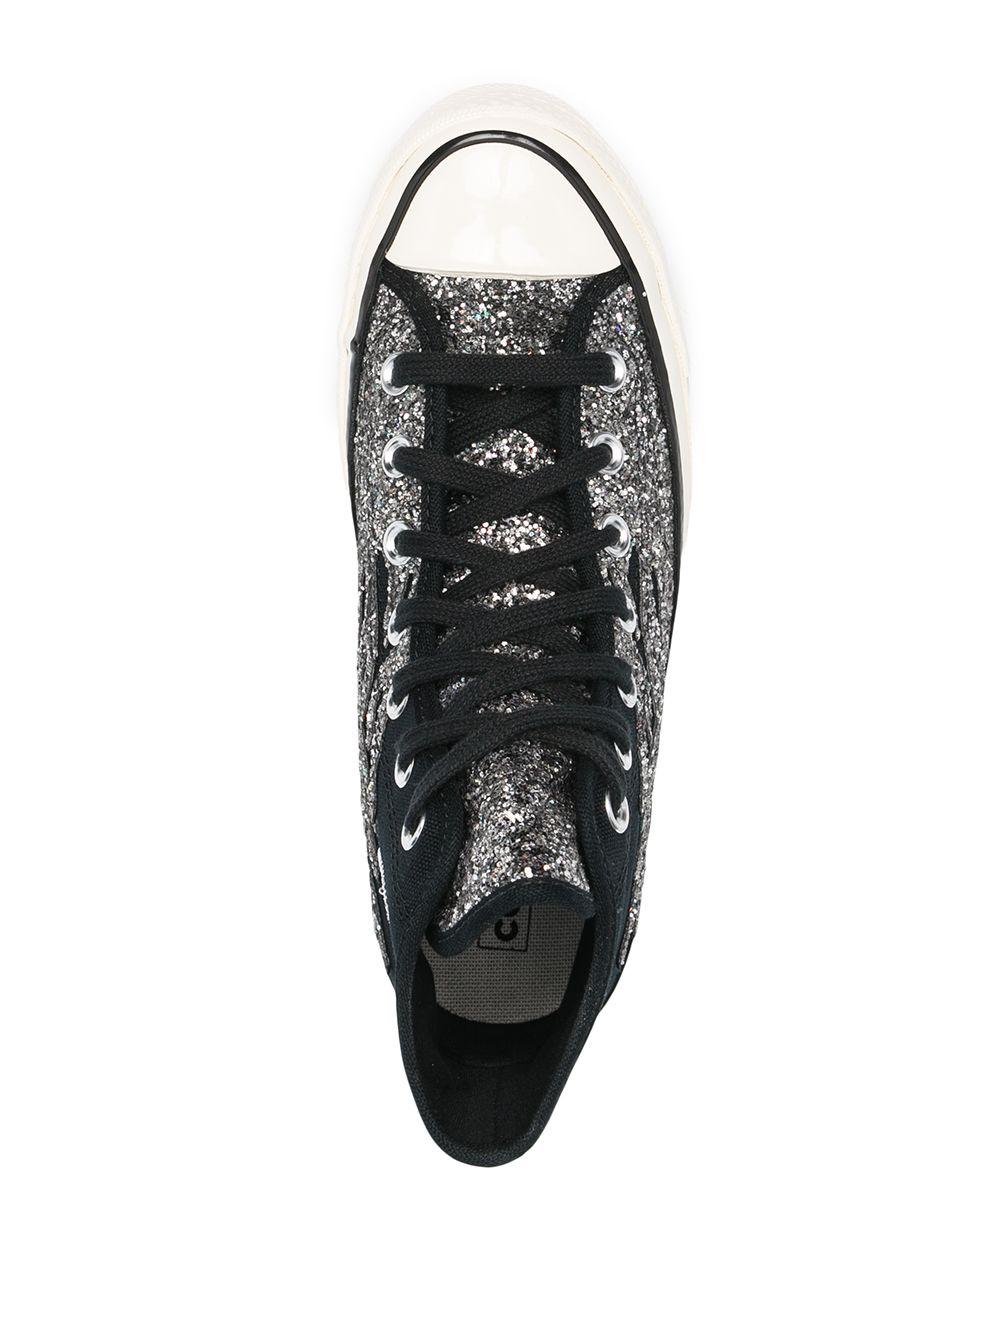 Converse Canvas Glitter Flame Chuck Taylor All-star Sneakers in Black - Lyst